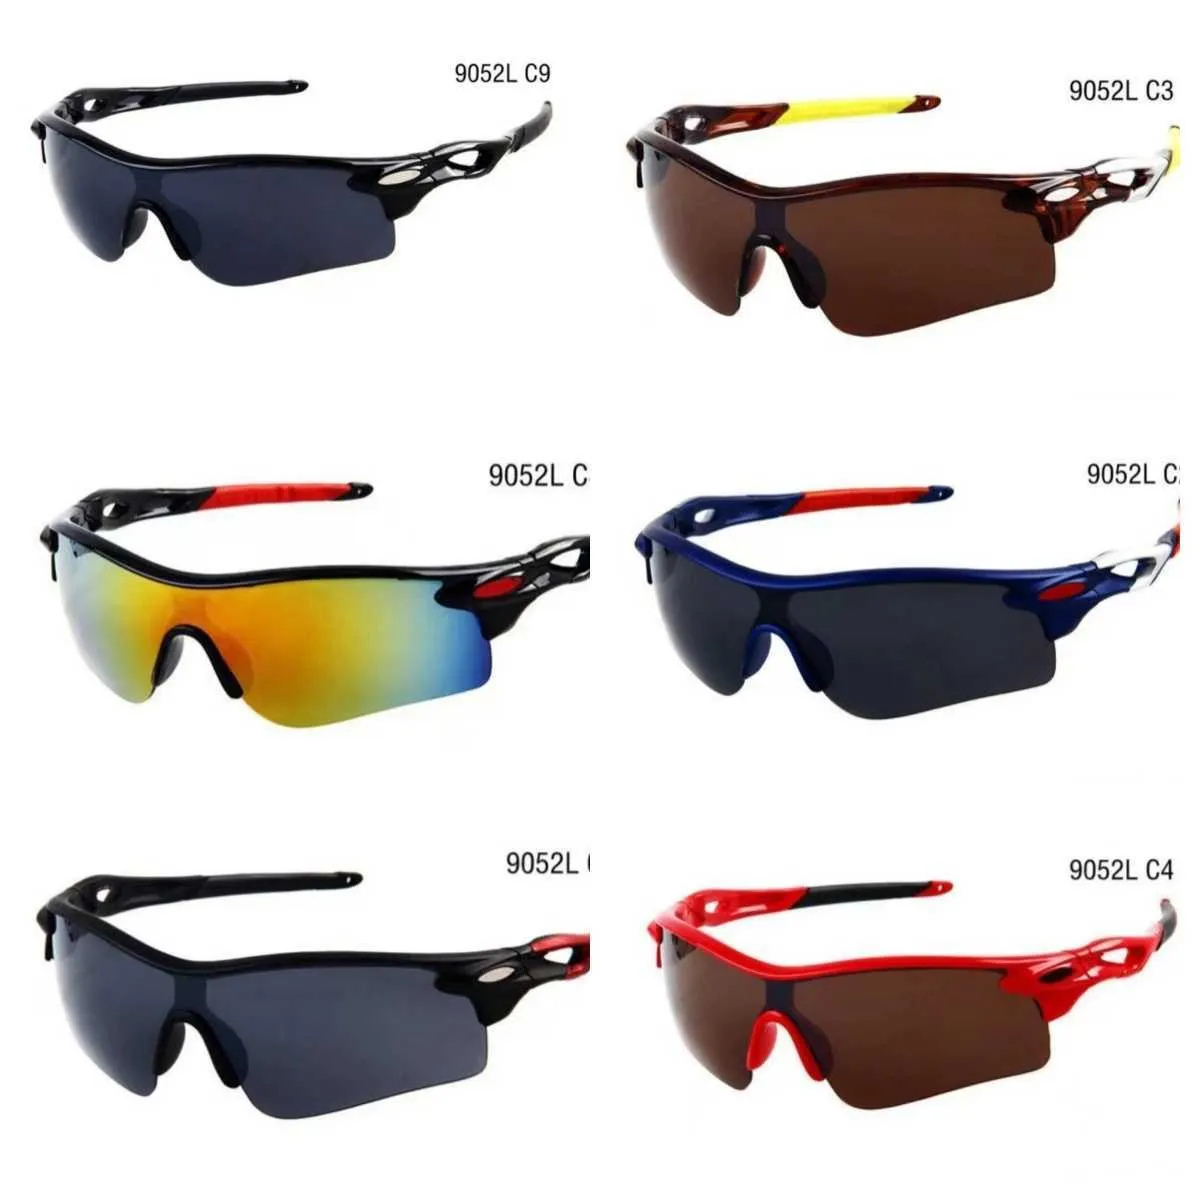 Oak Style MotoGP Sunglasses For Men UV400 Sports Goggles With Julian Wilson  Signature, Fashionable And Functional From Cc_sunglasses, $6.85